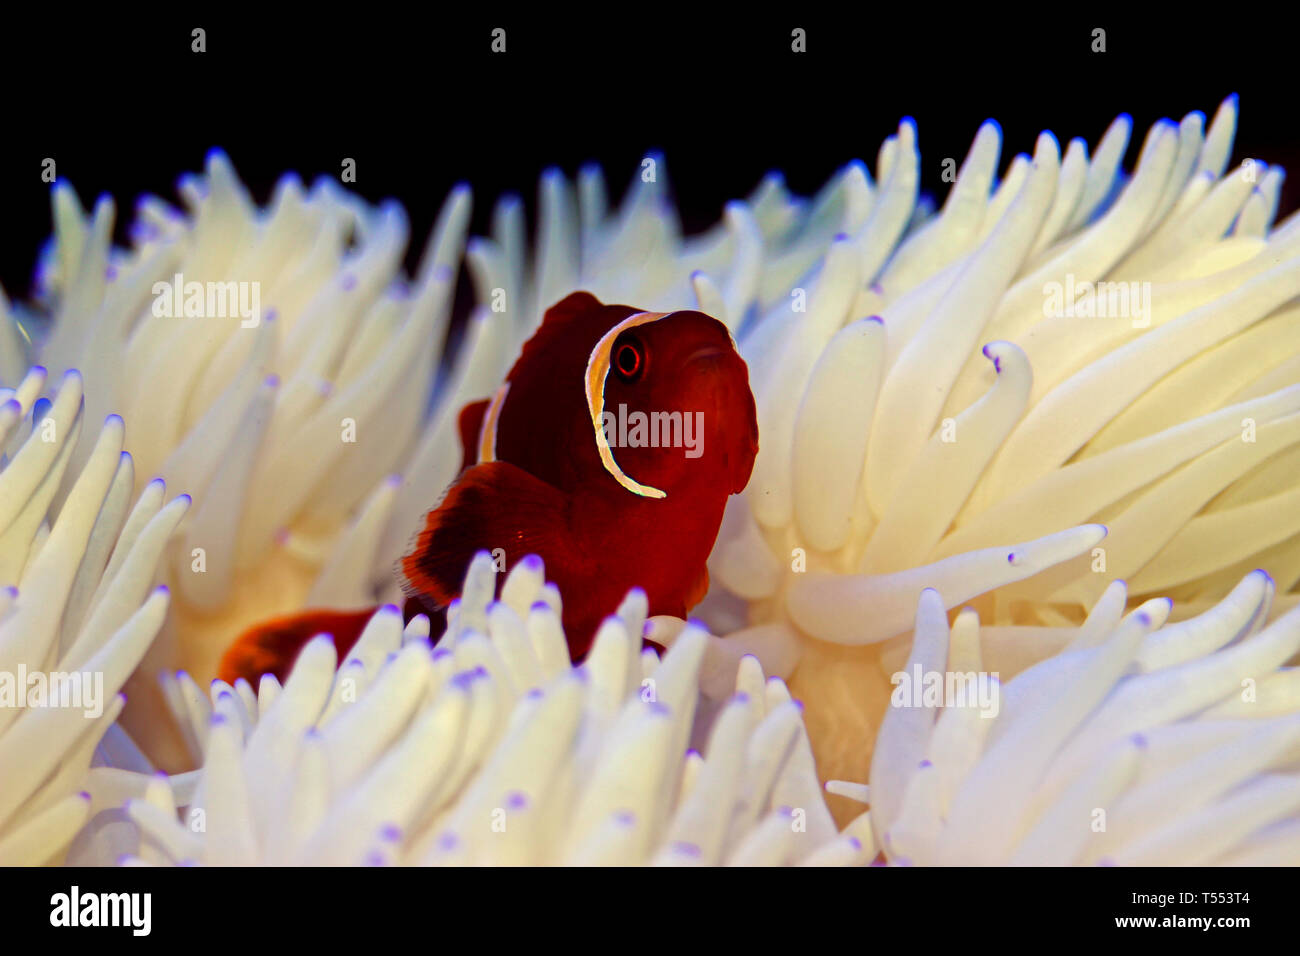 Red Goldenflake maroon Clownfish in relationship with white Sabae Anemone Stock Photo